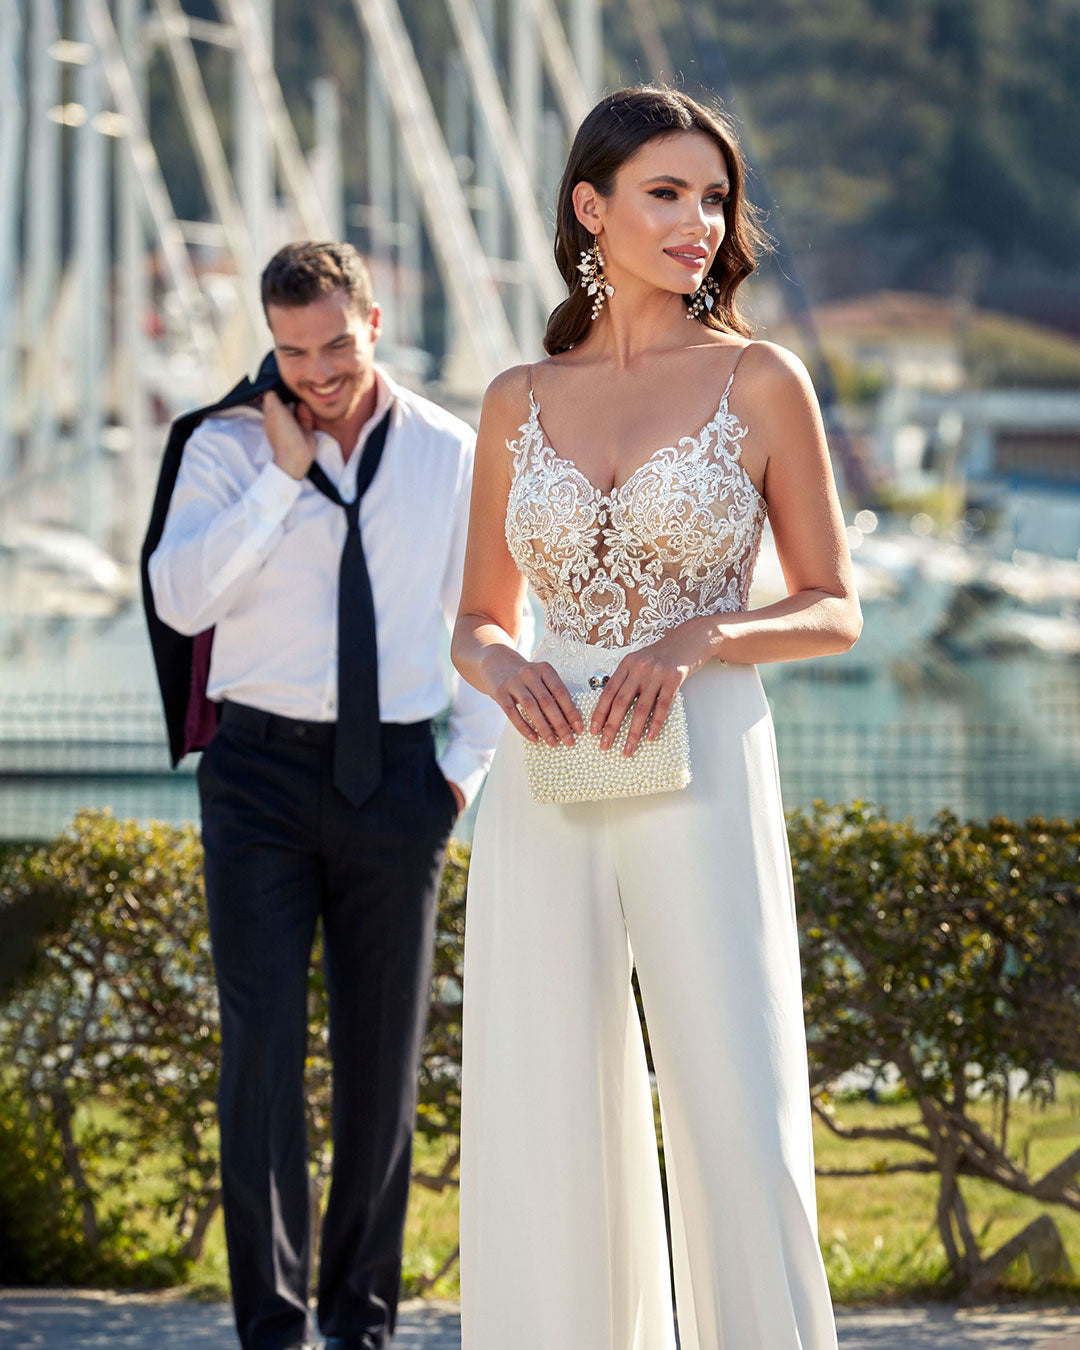 Ivory wedding jumpsuit with lace bodice.